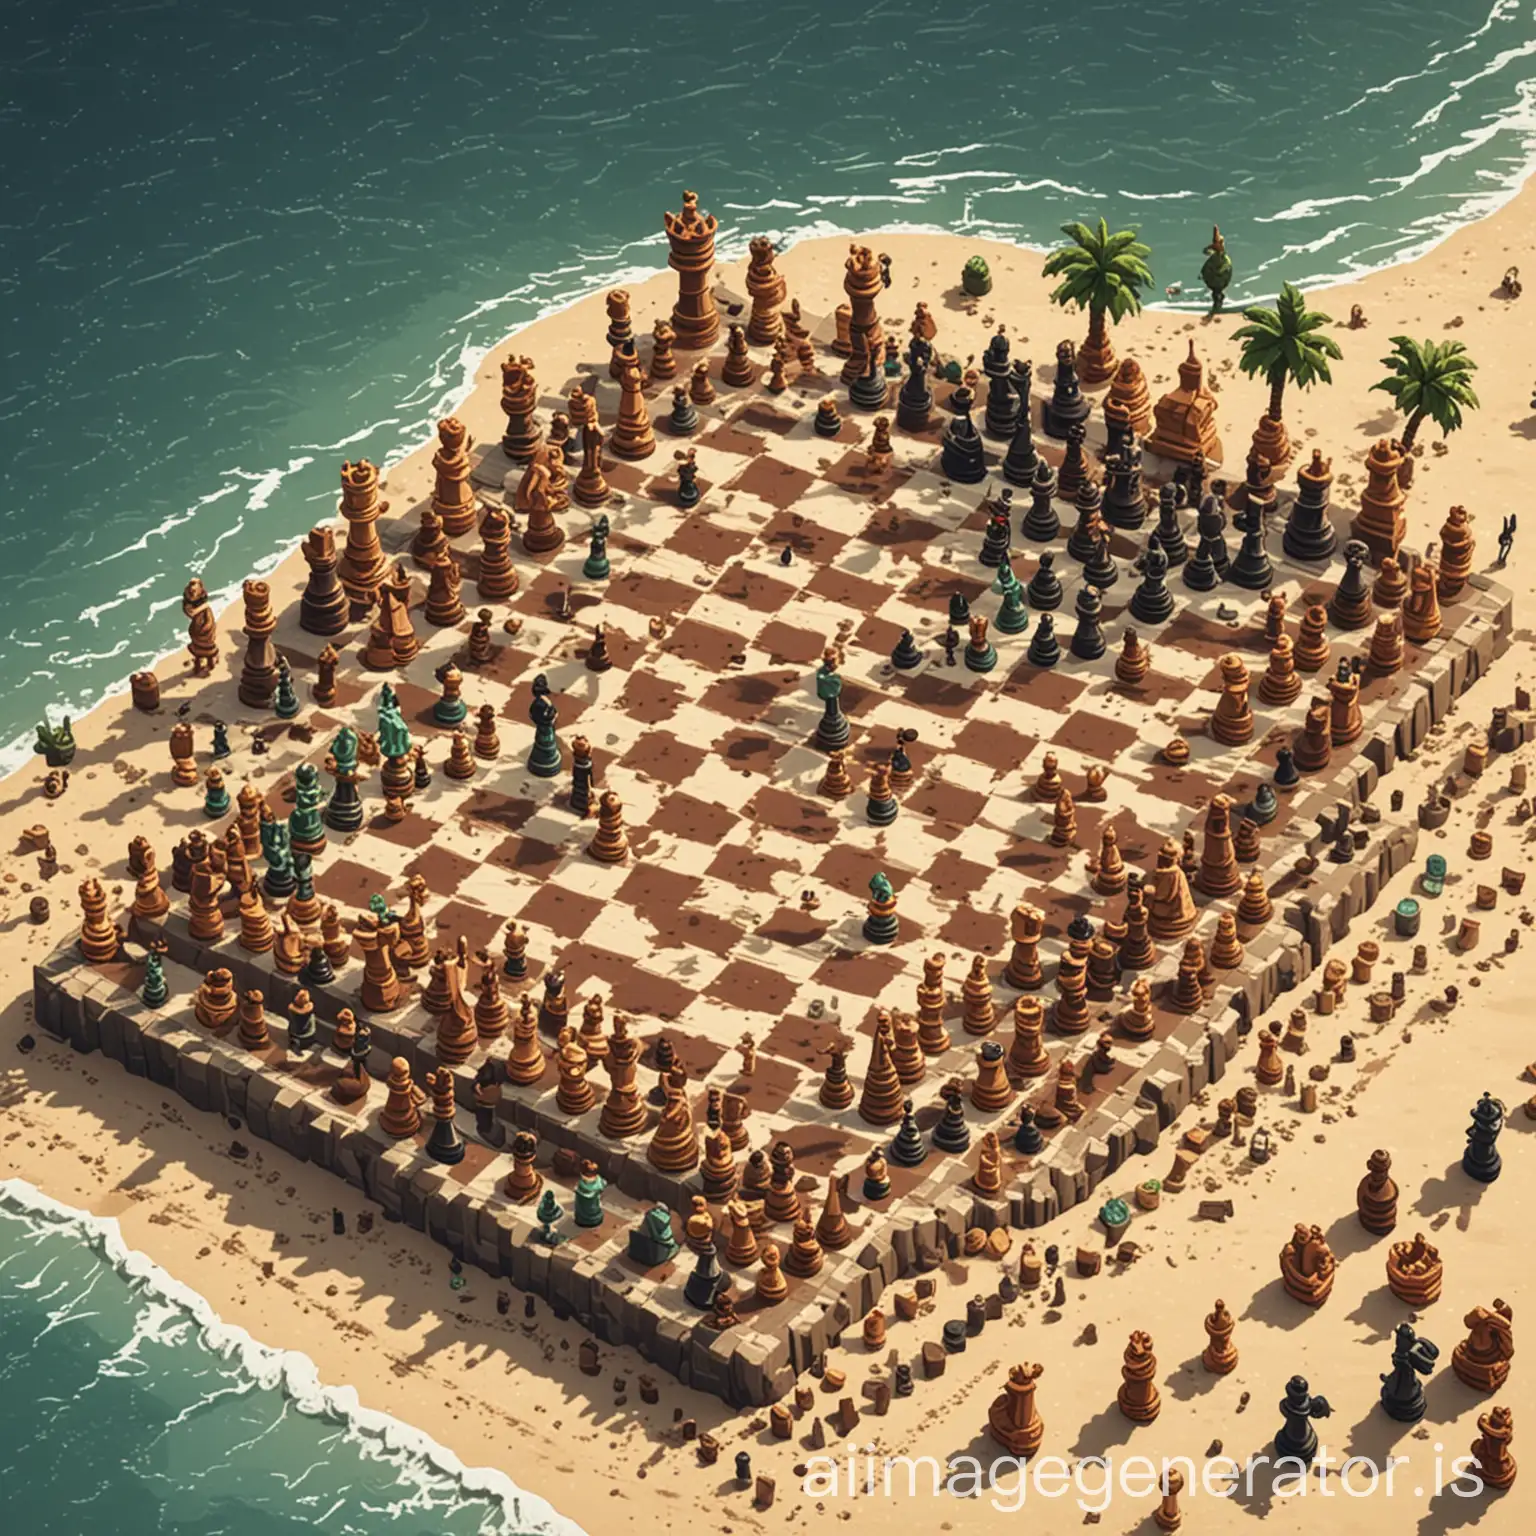 musical chess in an island beach in pixel art style, but take care that the chess board is 8x8 squares